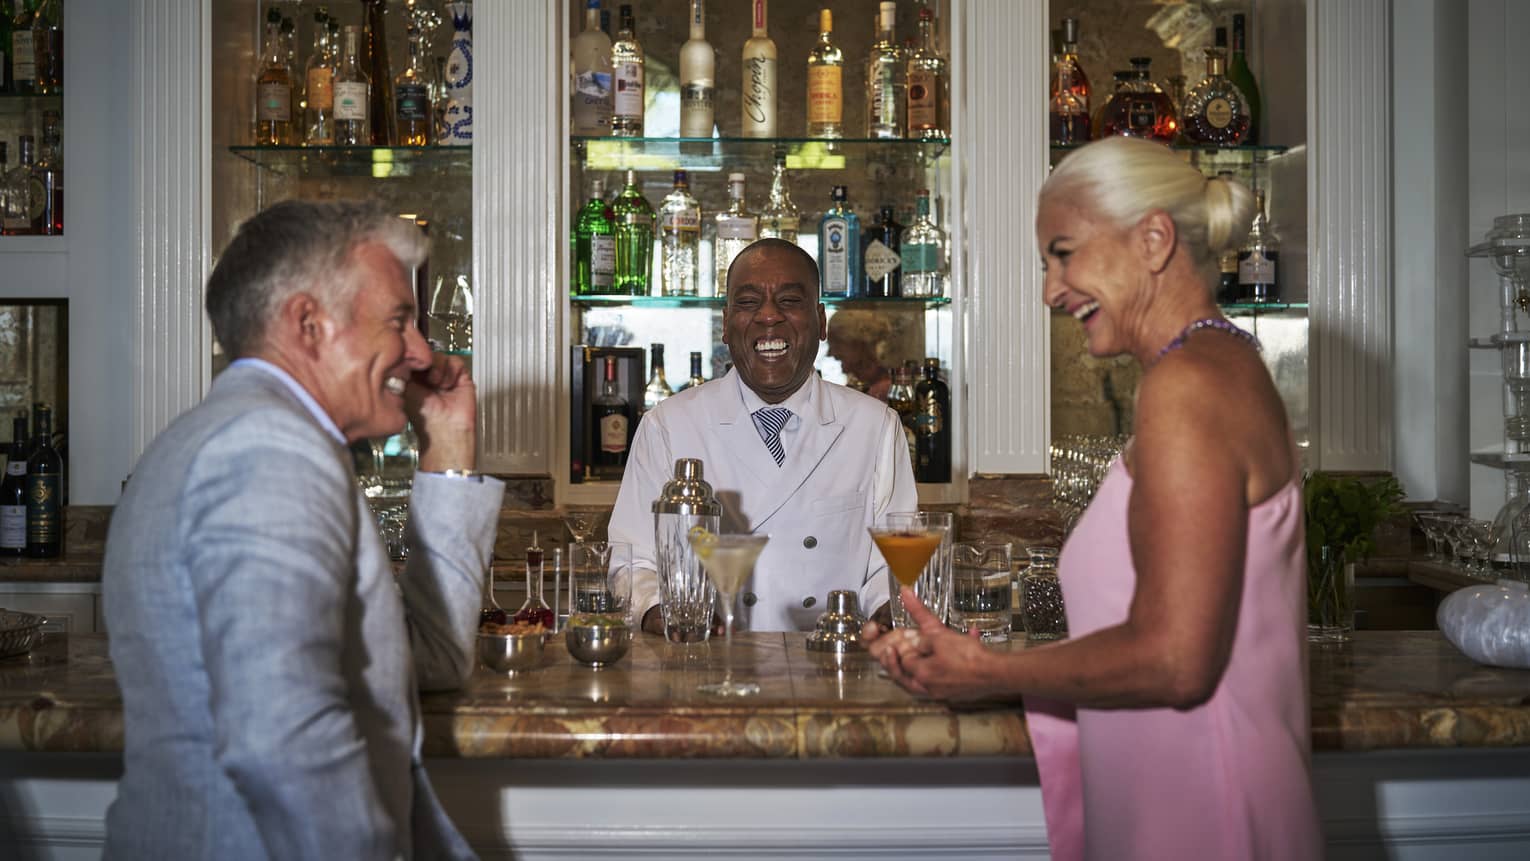 Man and woman standing at the bar, laughing together with the bartender.